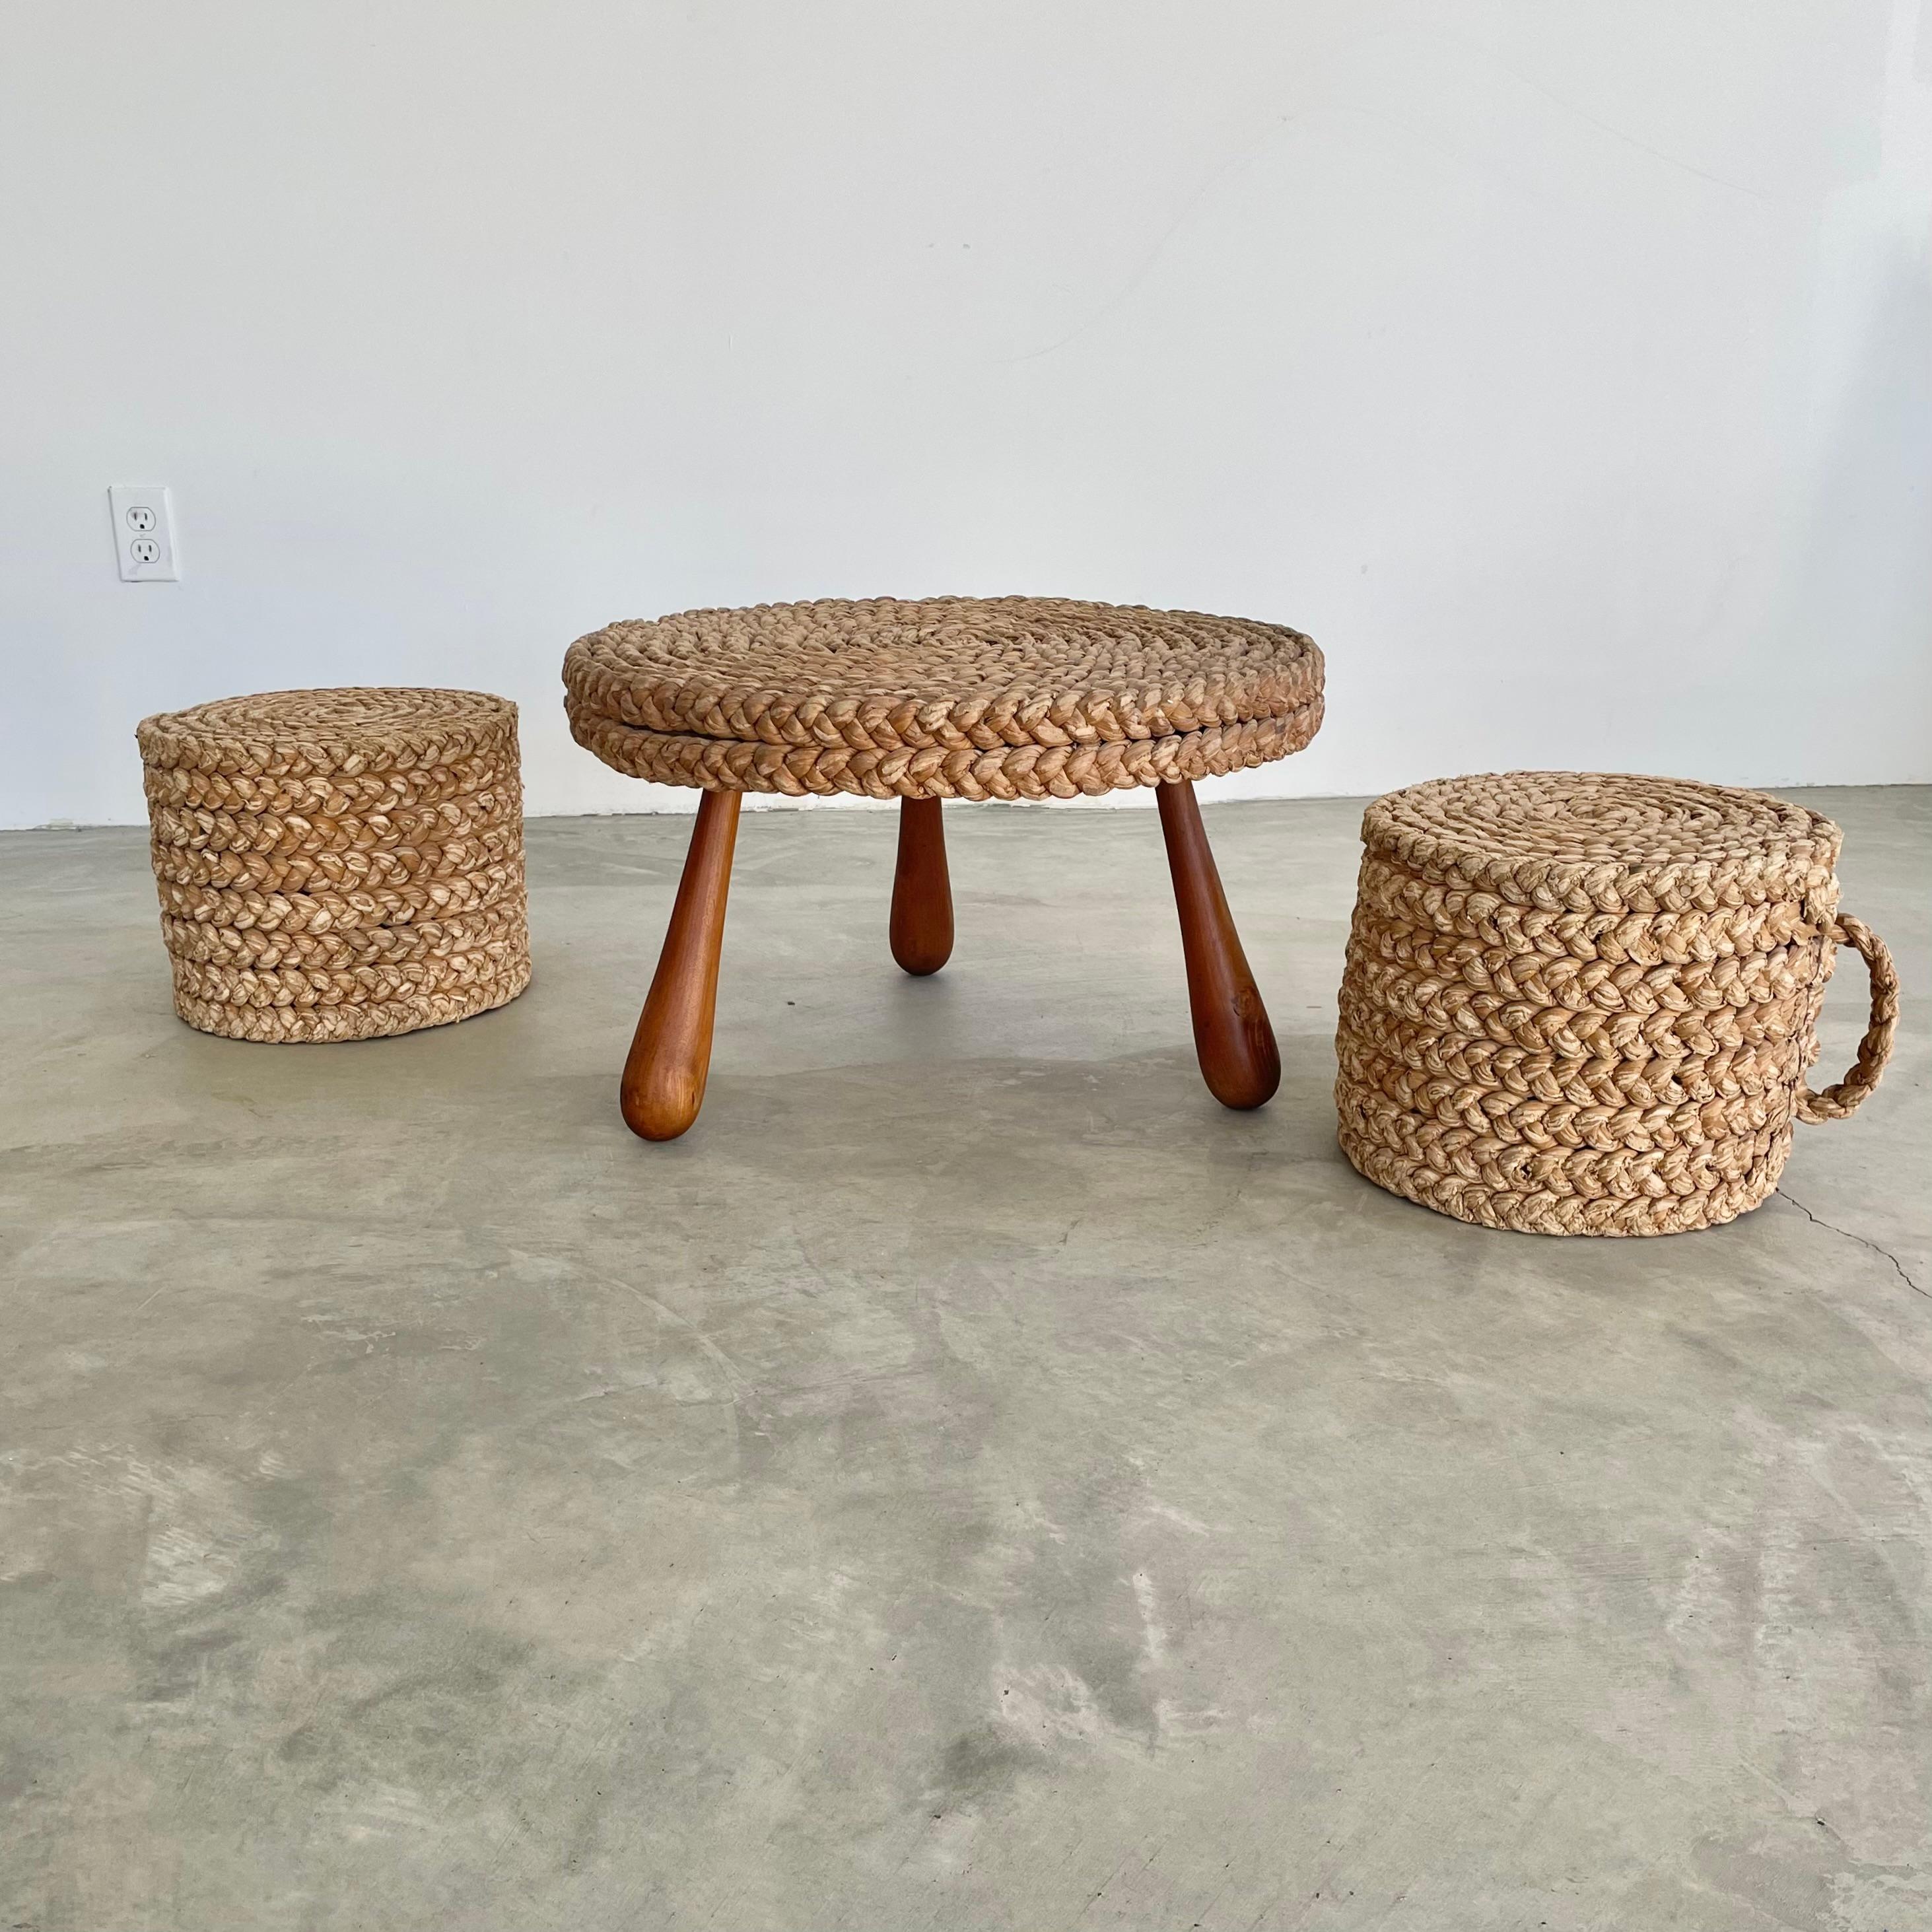 Rope and Wood Table with Two Nesting Stools, 1960s France For Sale 6